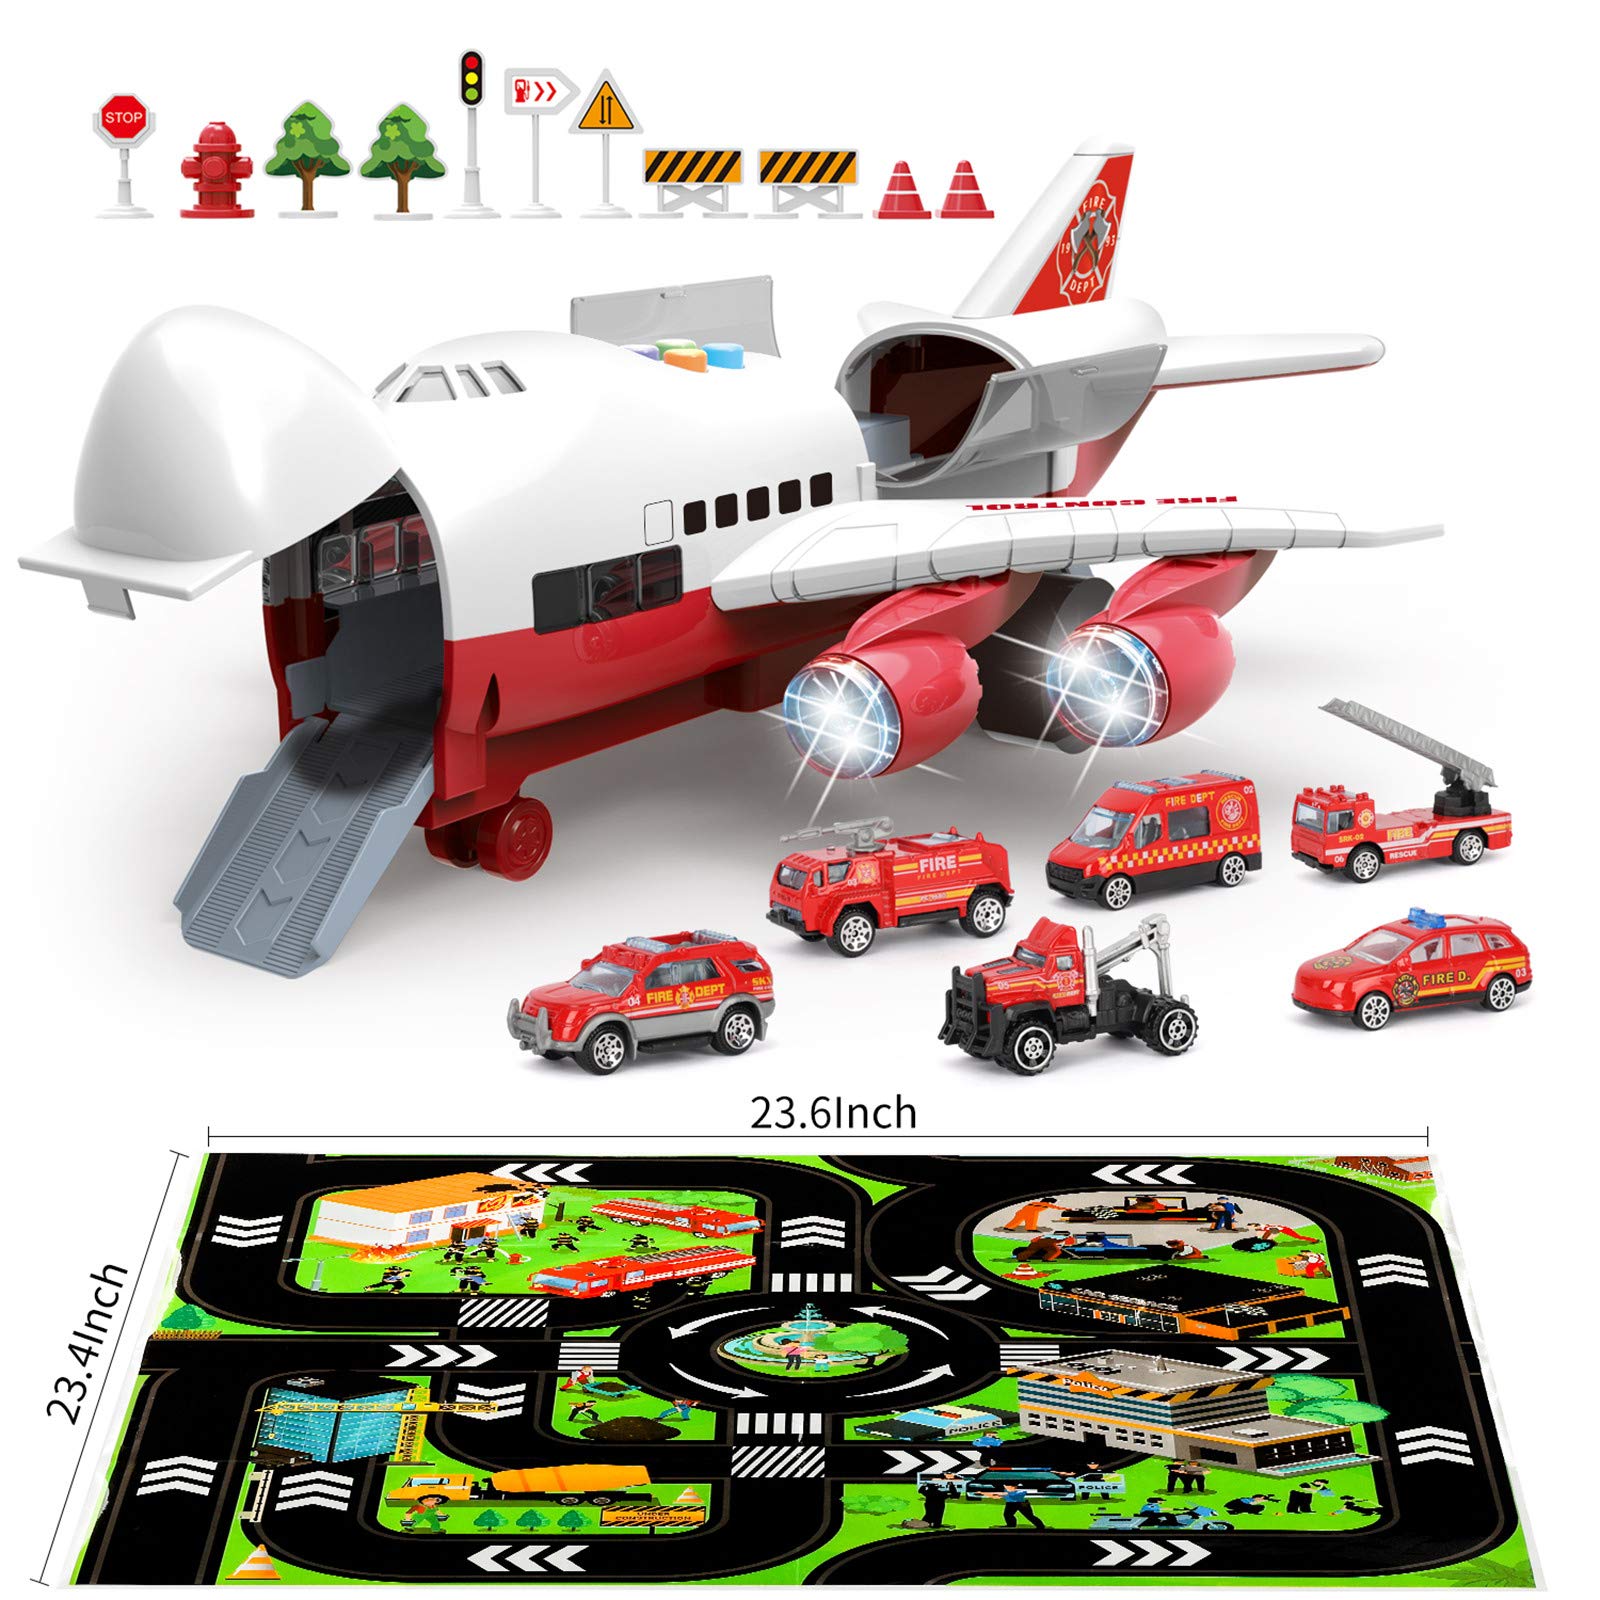 2021 New Style Plastic Teeth Toy - BeebeeRun Transport Cargo Airplane-Car Toys for Boys with Large Play Mat, Sounds Buttons Flashing Light,Vehicles Fire Trucks for Kids Toddlers,Gift for 3 4 5 6 Y...